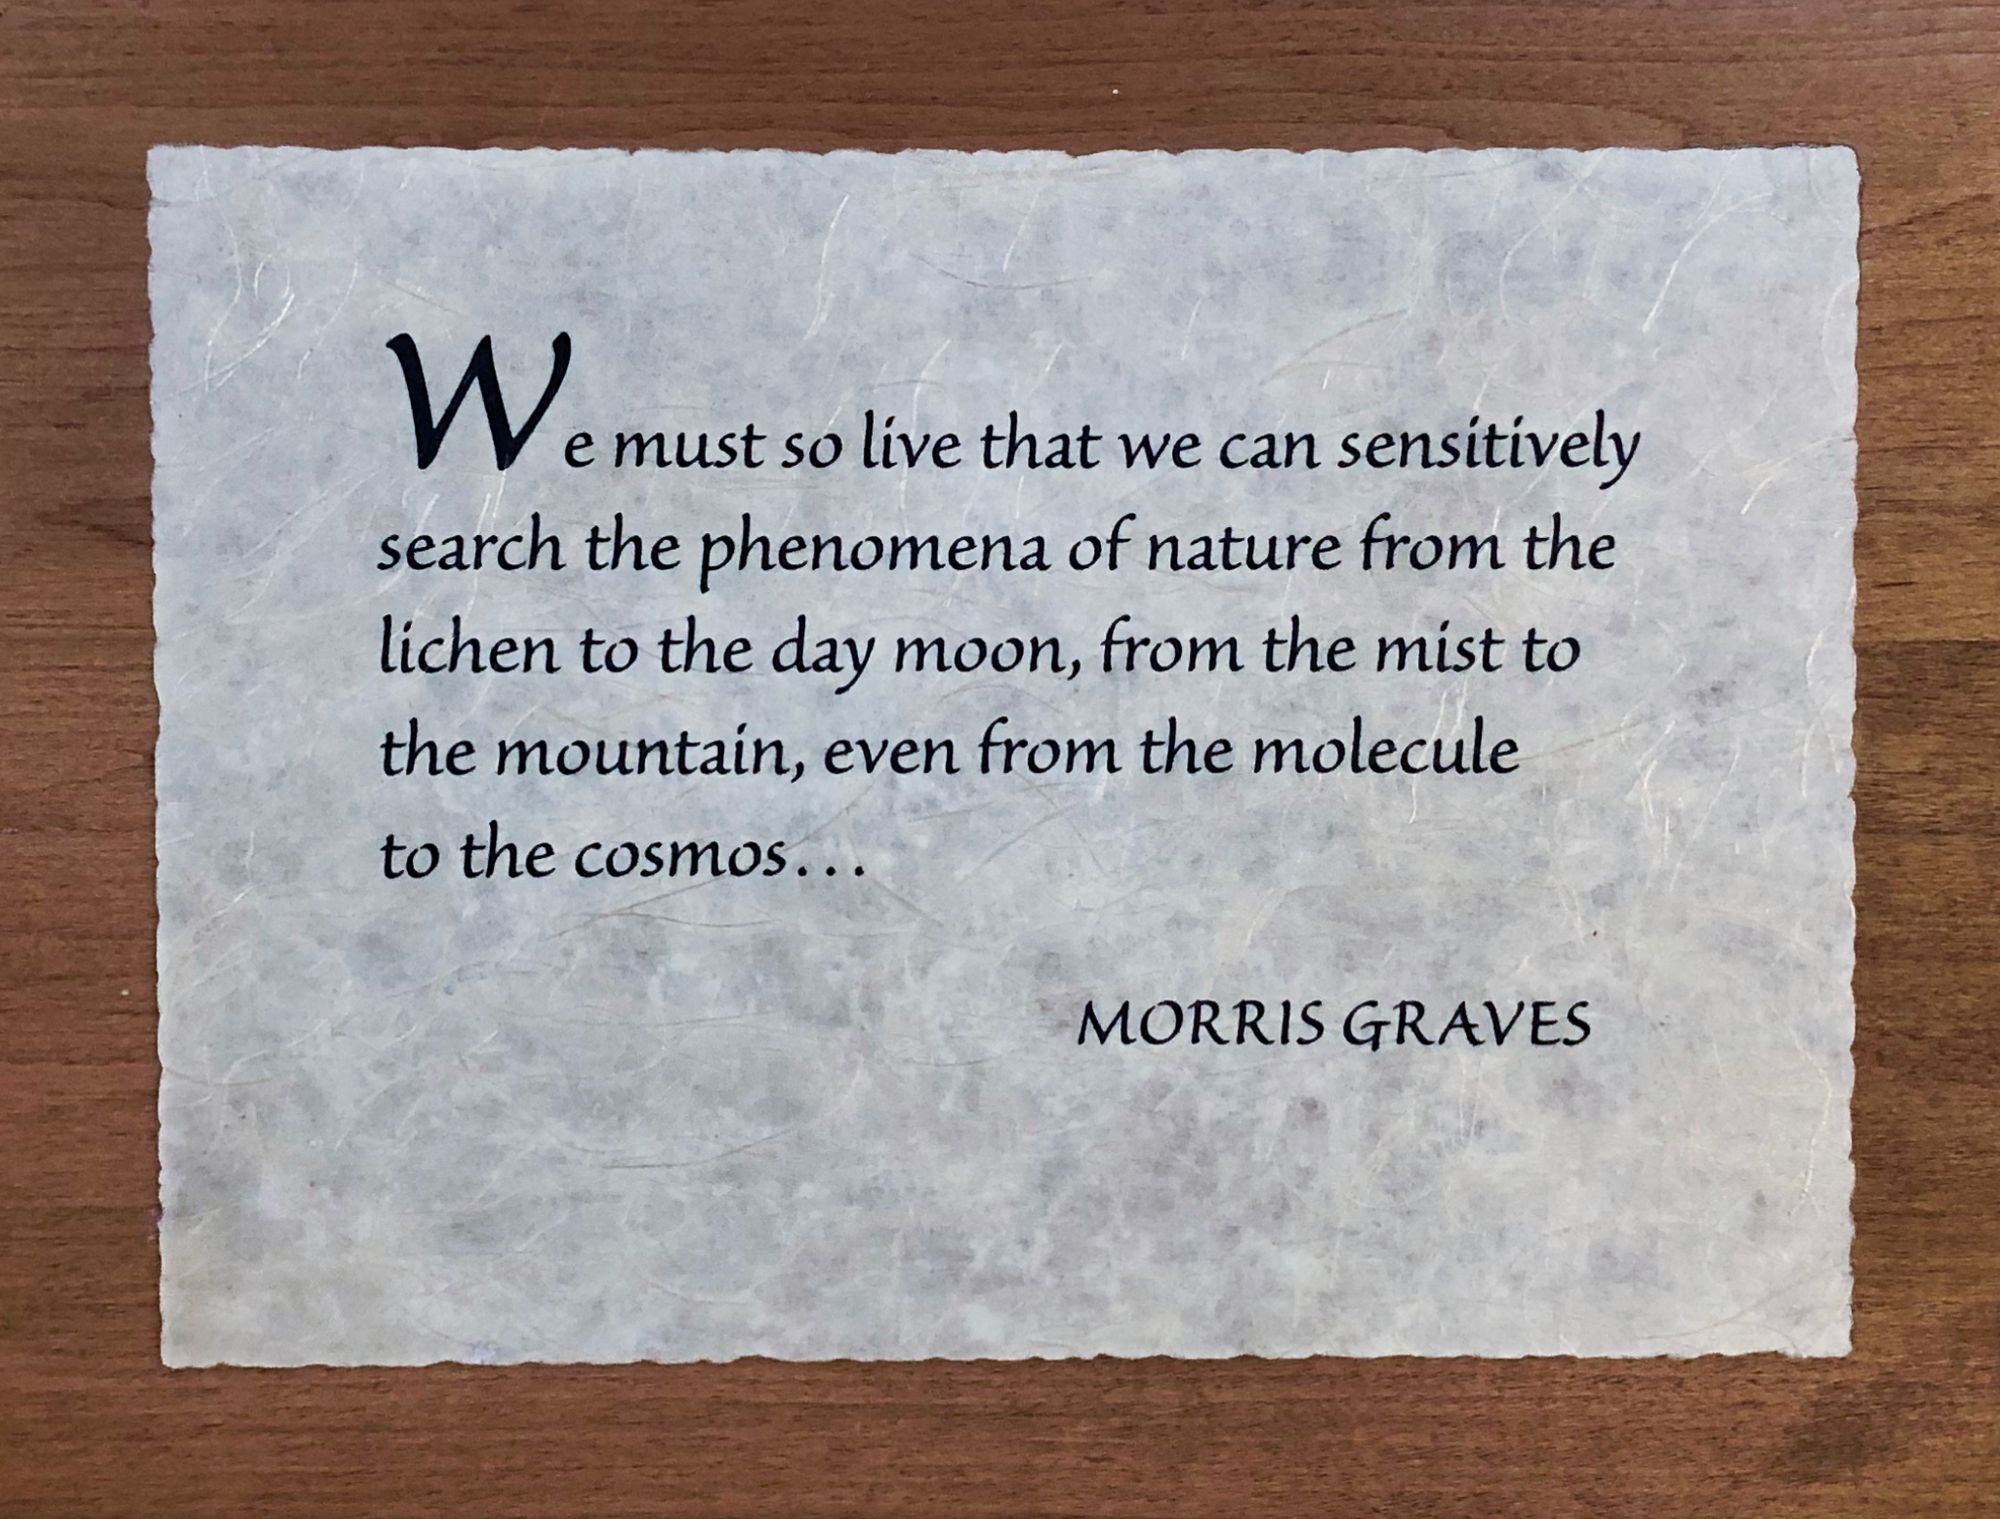 Photo of wooden plaque with Morris Graves quote: “We must so live that we can sensitively search the phenomena of nature from the lichen the day moon, from the mist to the mountain, even from the molecule to the cosmos.” 